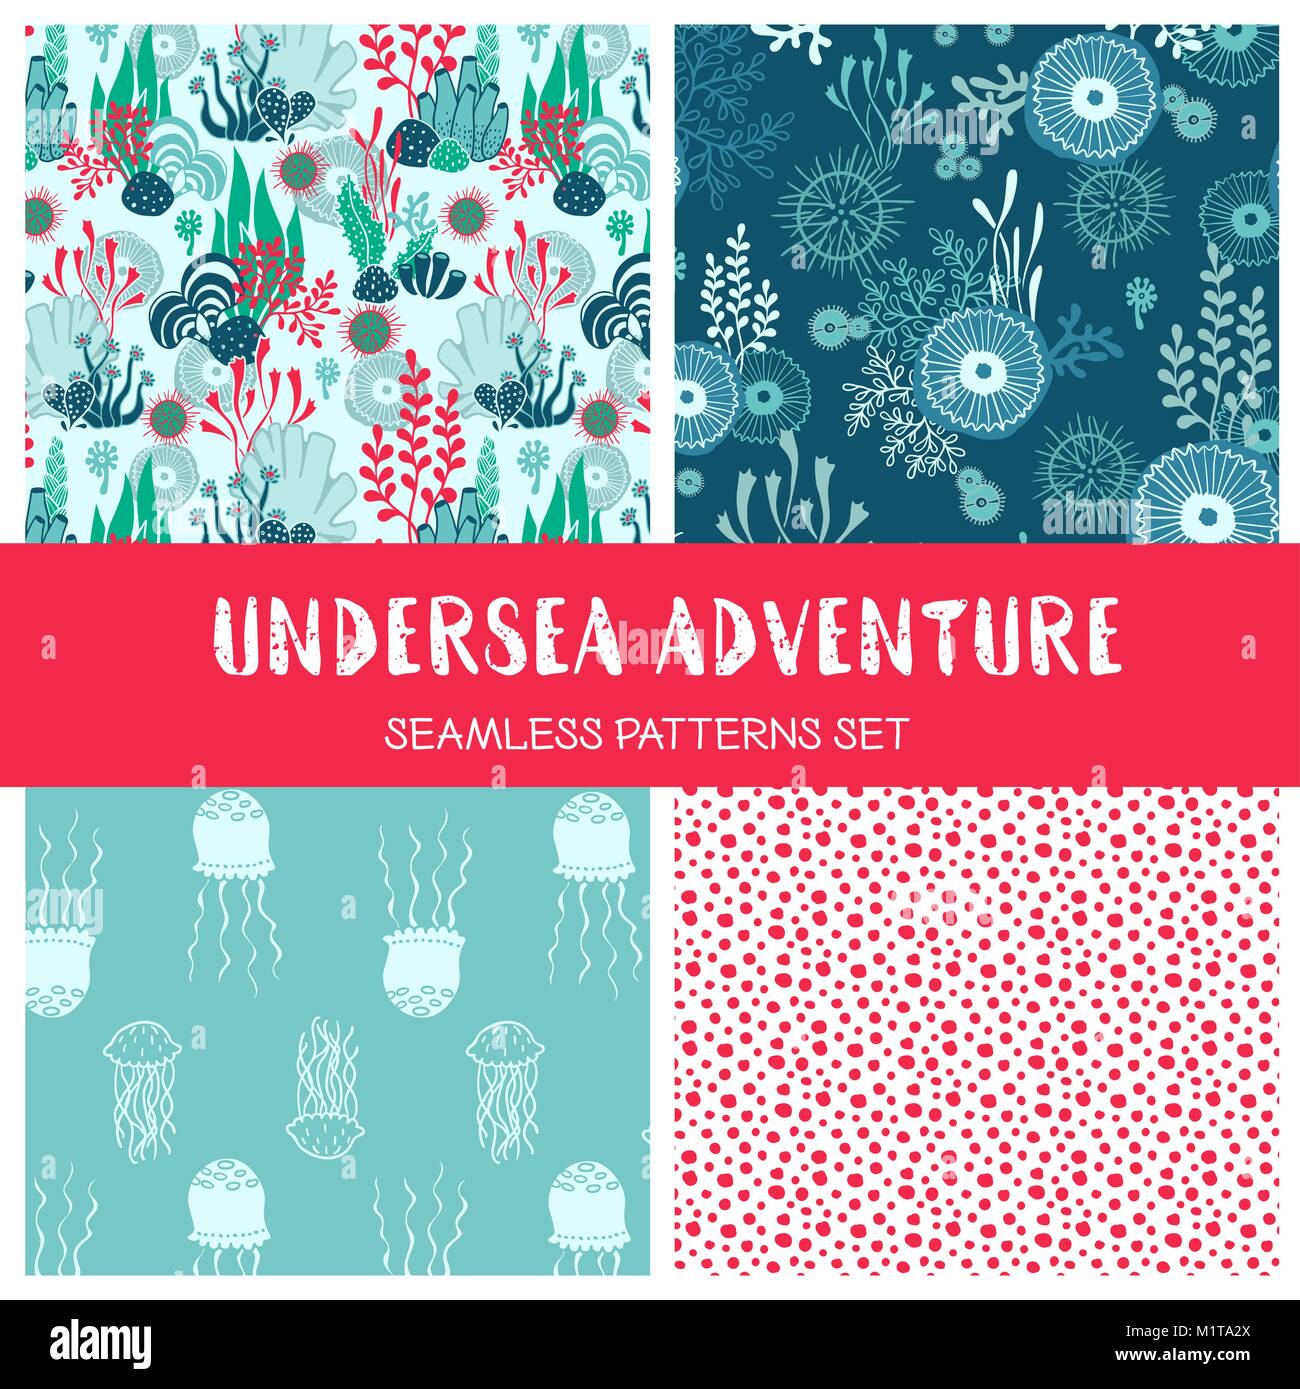 Vector set of hand drawn underwater seamless pattern with seaweeds jellyfish and other sea plants and habitants Stock Vector